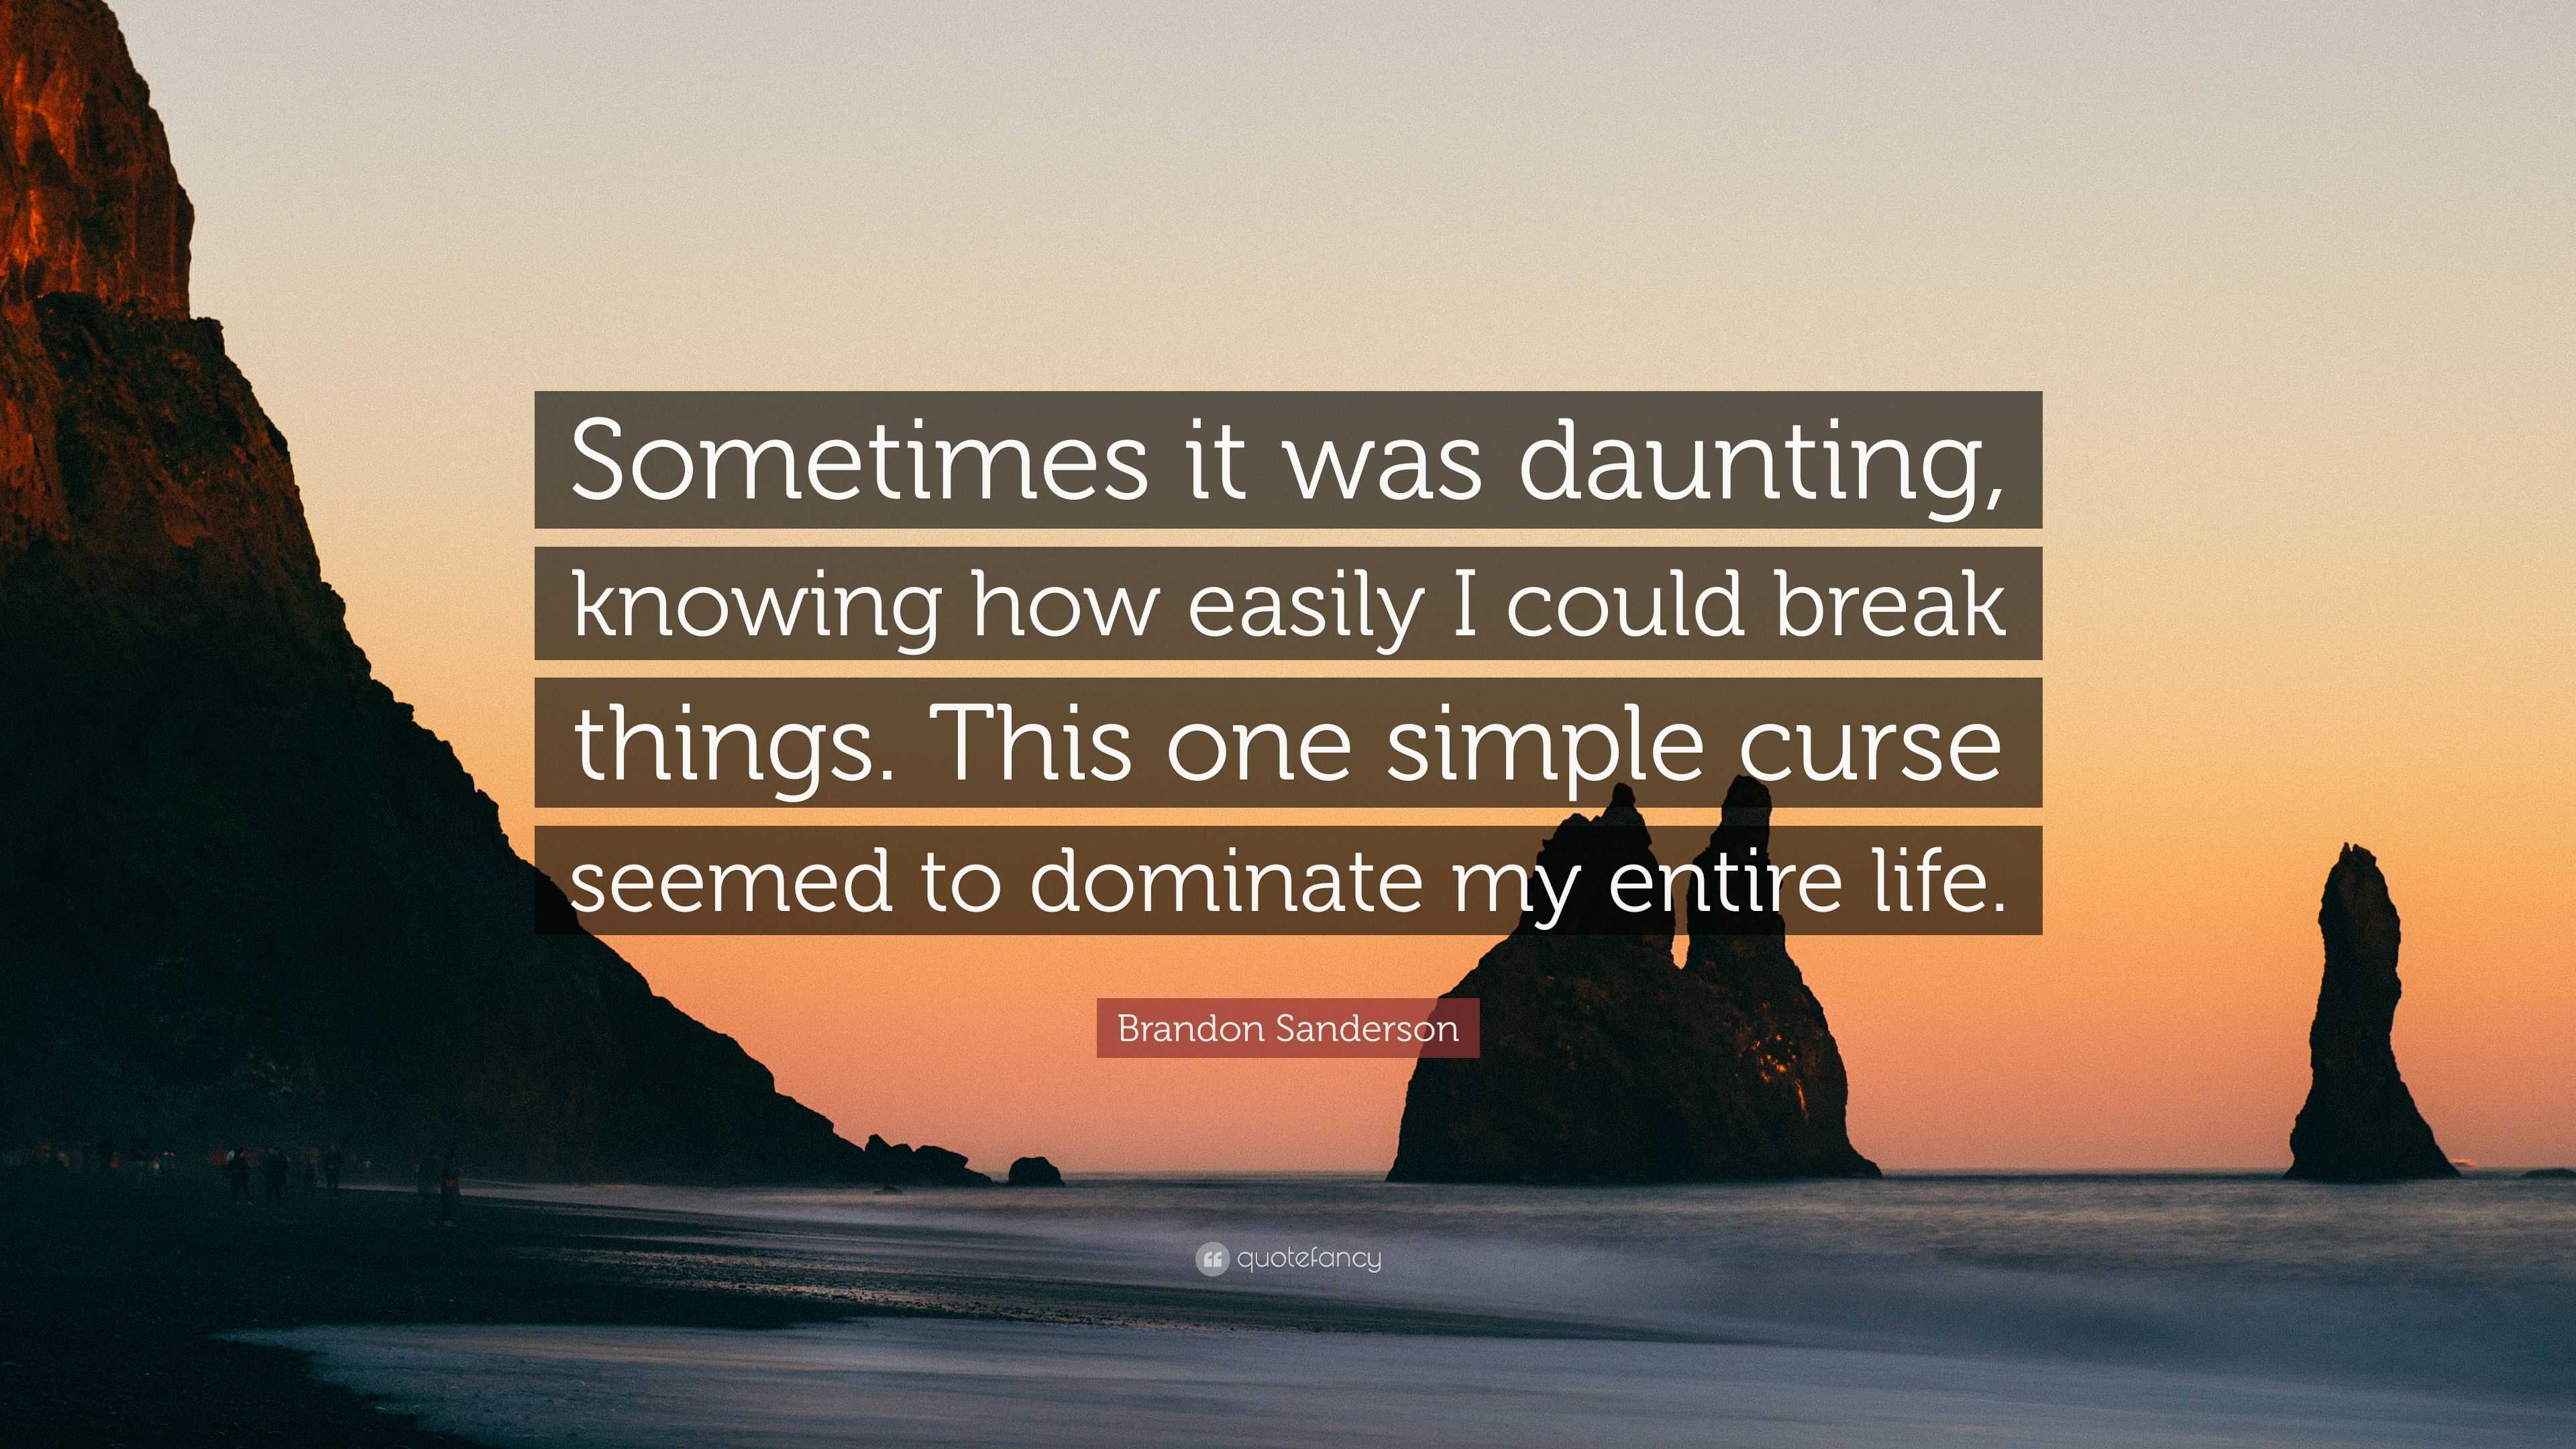 https://quotefancy.com/media/wallpaper/3840x2160/5622694-Brandon-Sanderson-Quote-Sometimes-it-was-daunting-knowing-how.jpg